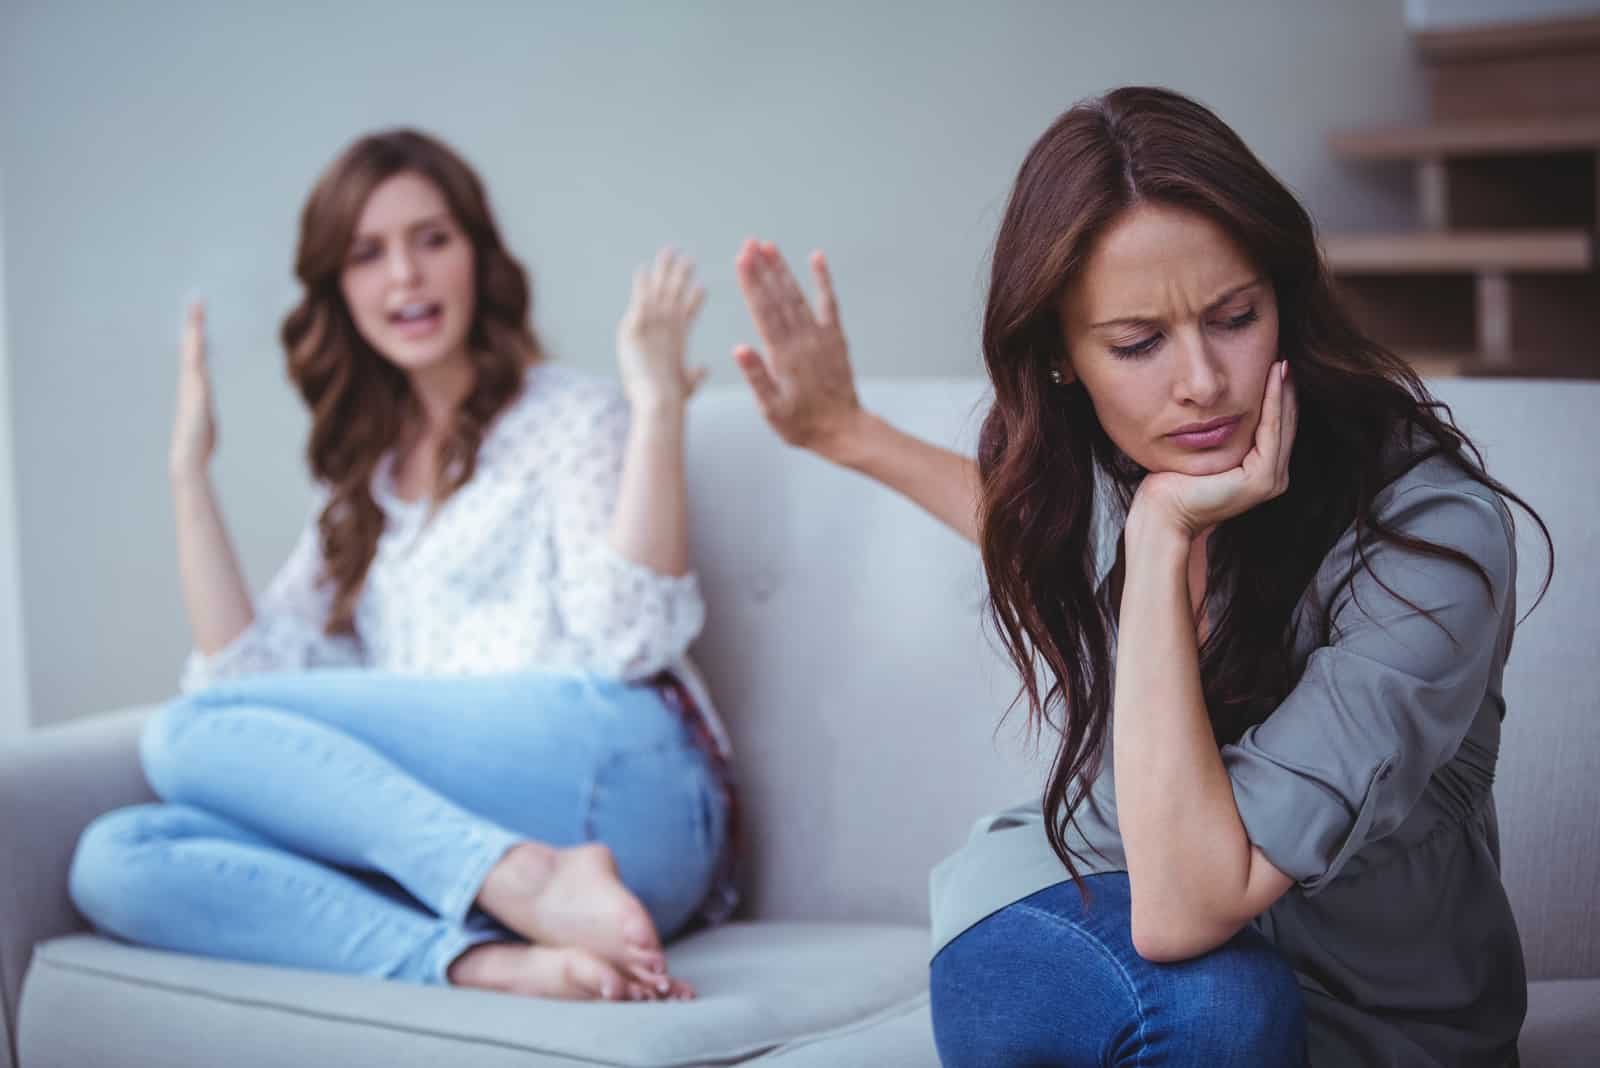 16 Of The Most Obvious Signs Your Friend Doesn’t Respect You